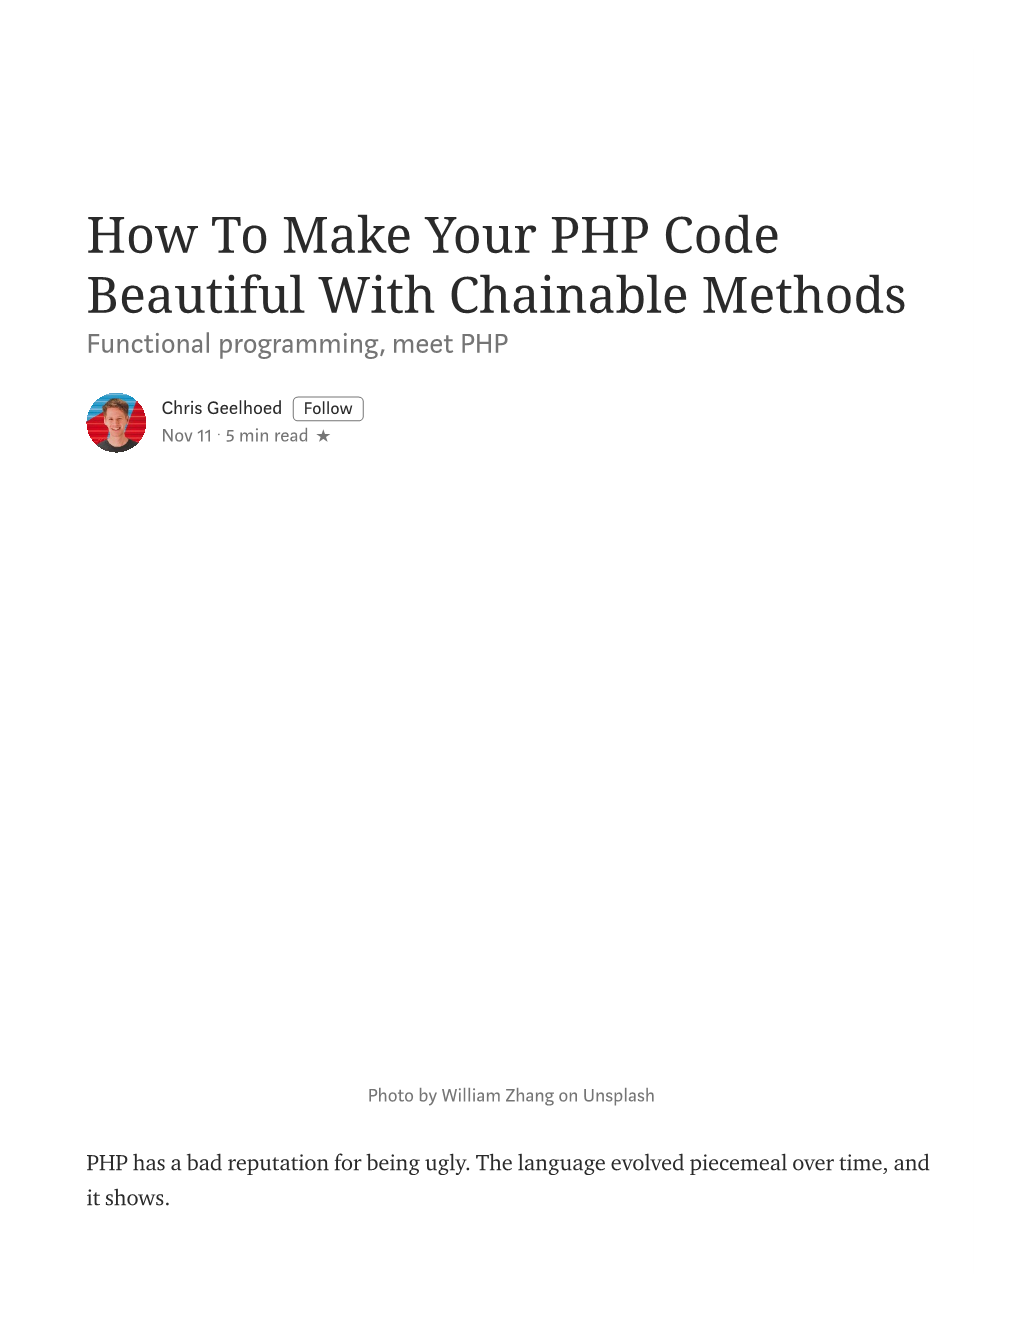 How to Make Your PHP Code Beautiful with Chainable Methods.Pdf